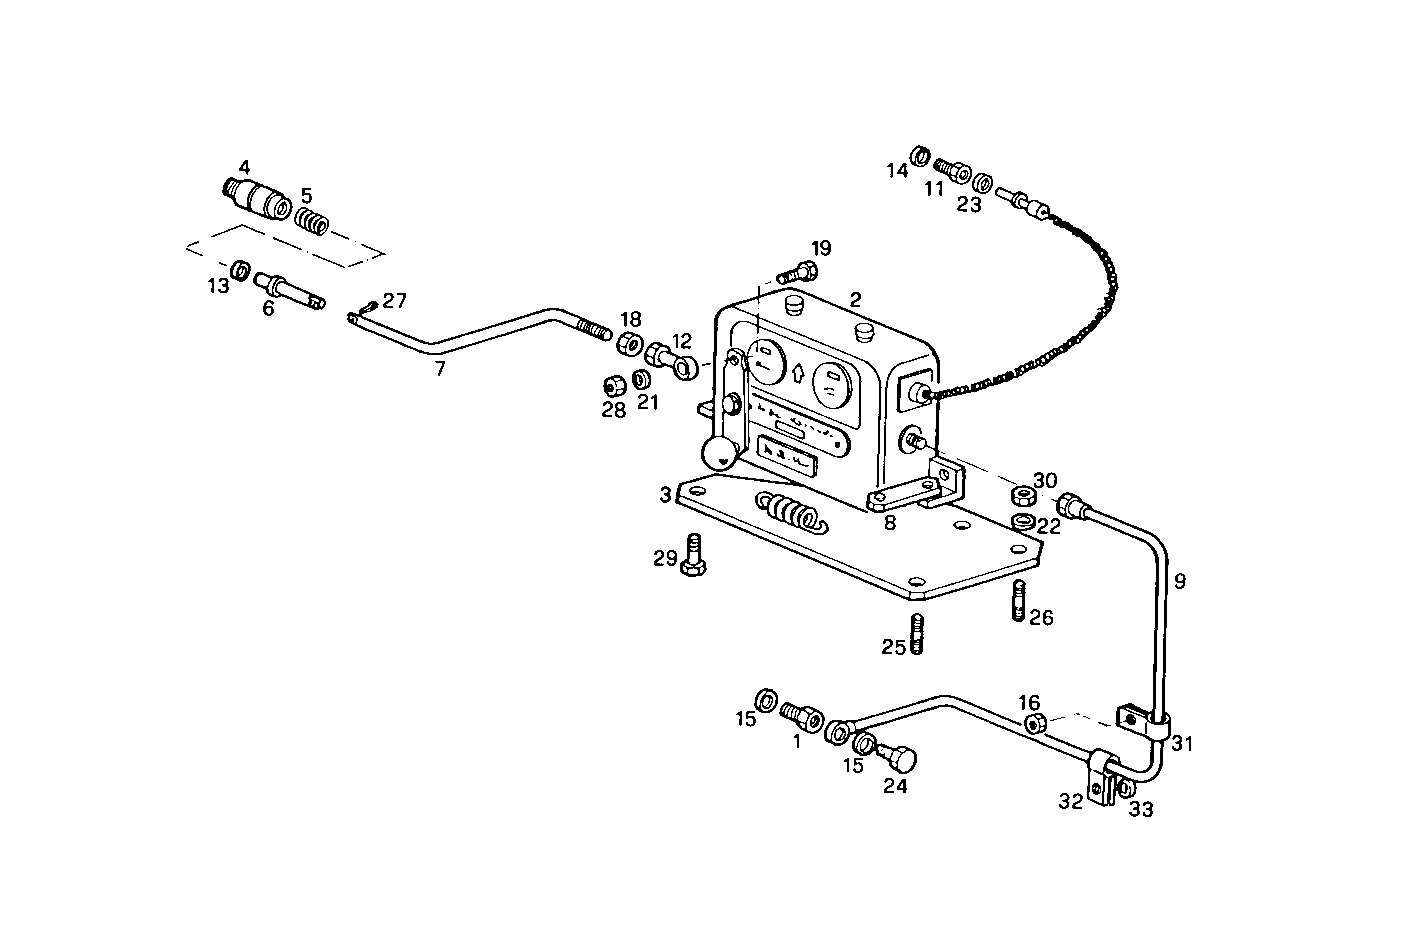 Iveco/FPT MECHANICAL STOP SOLENOID